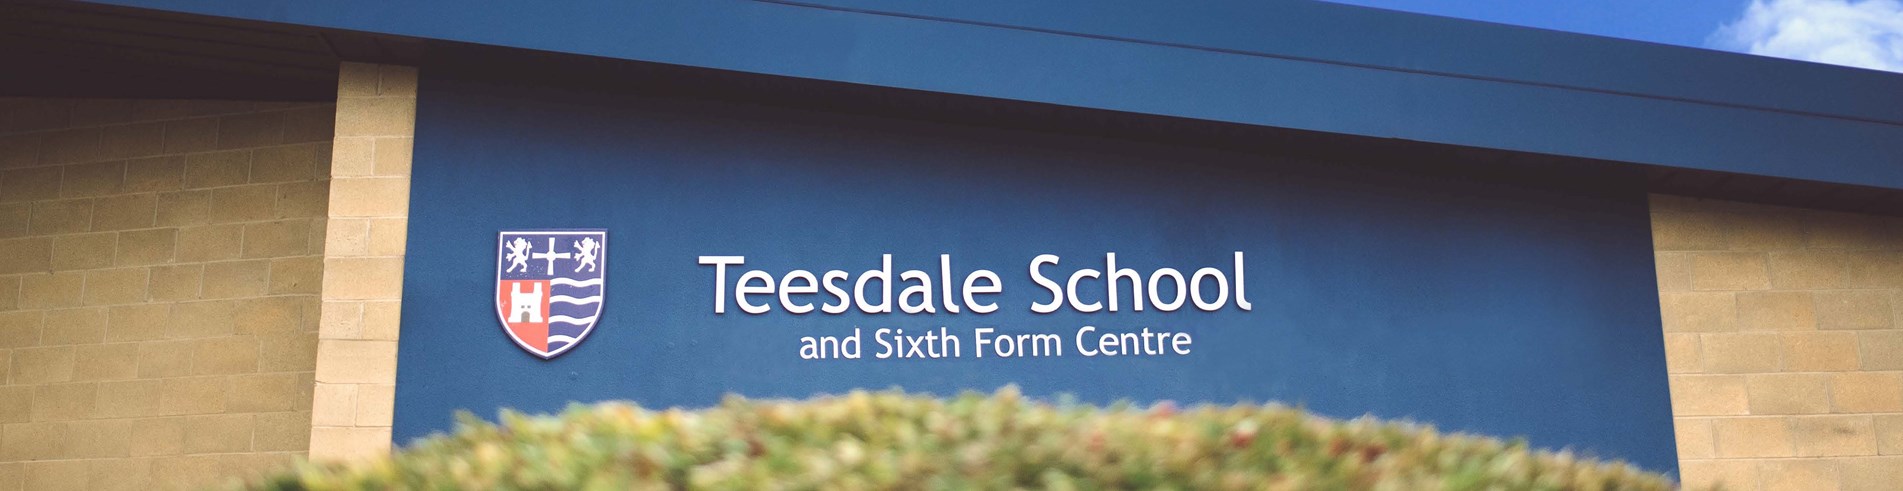 Teesdale School and Sixth Form